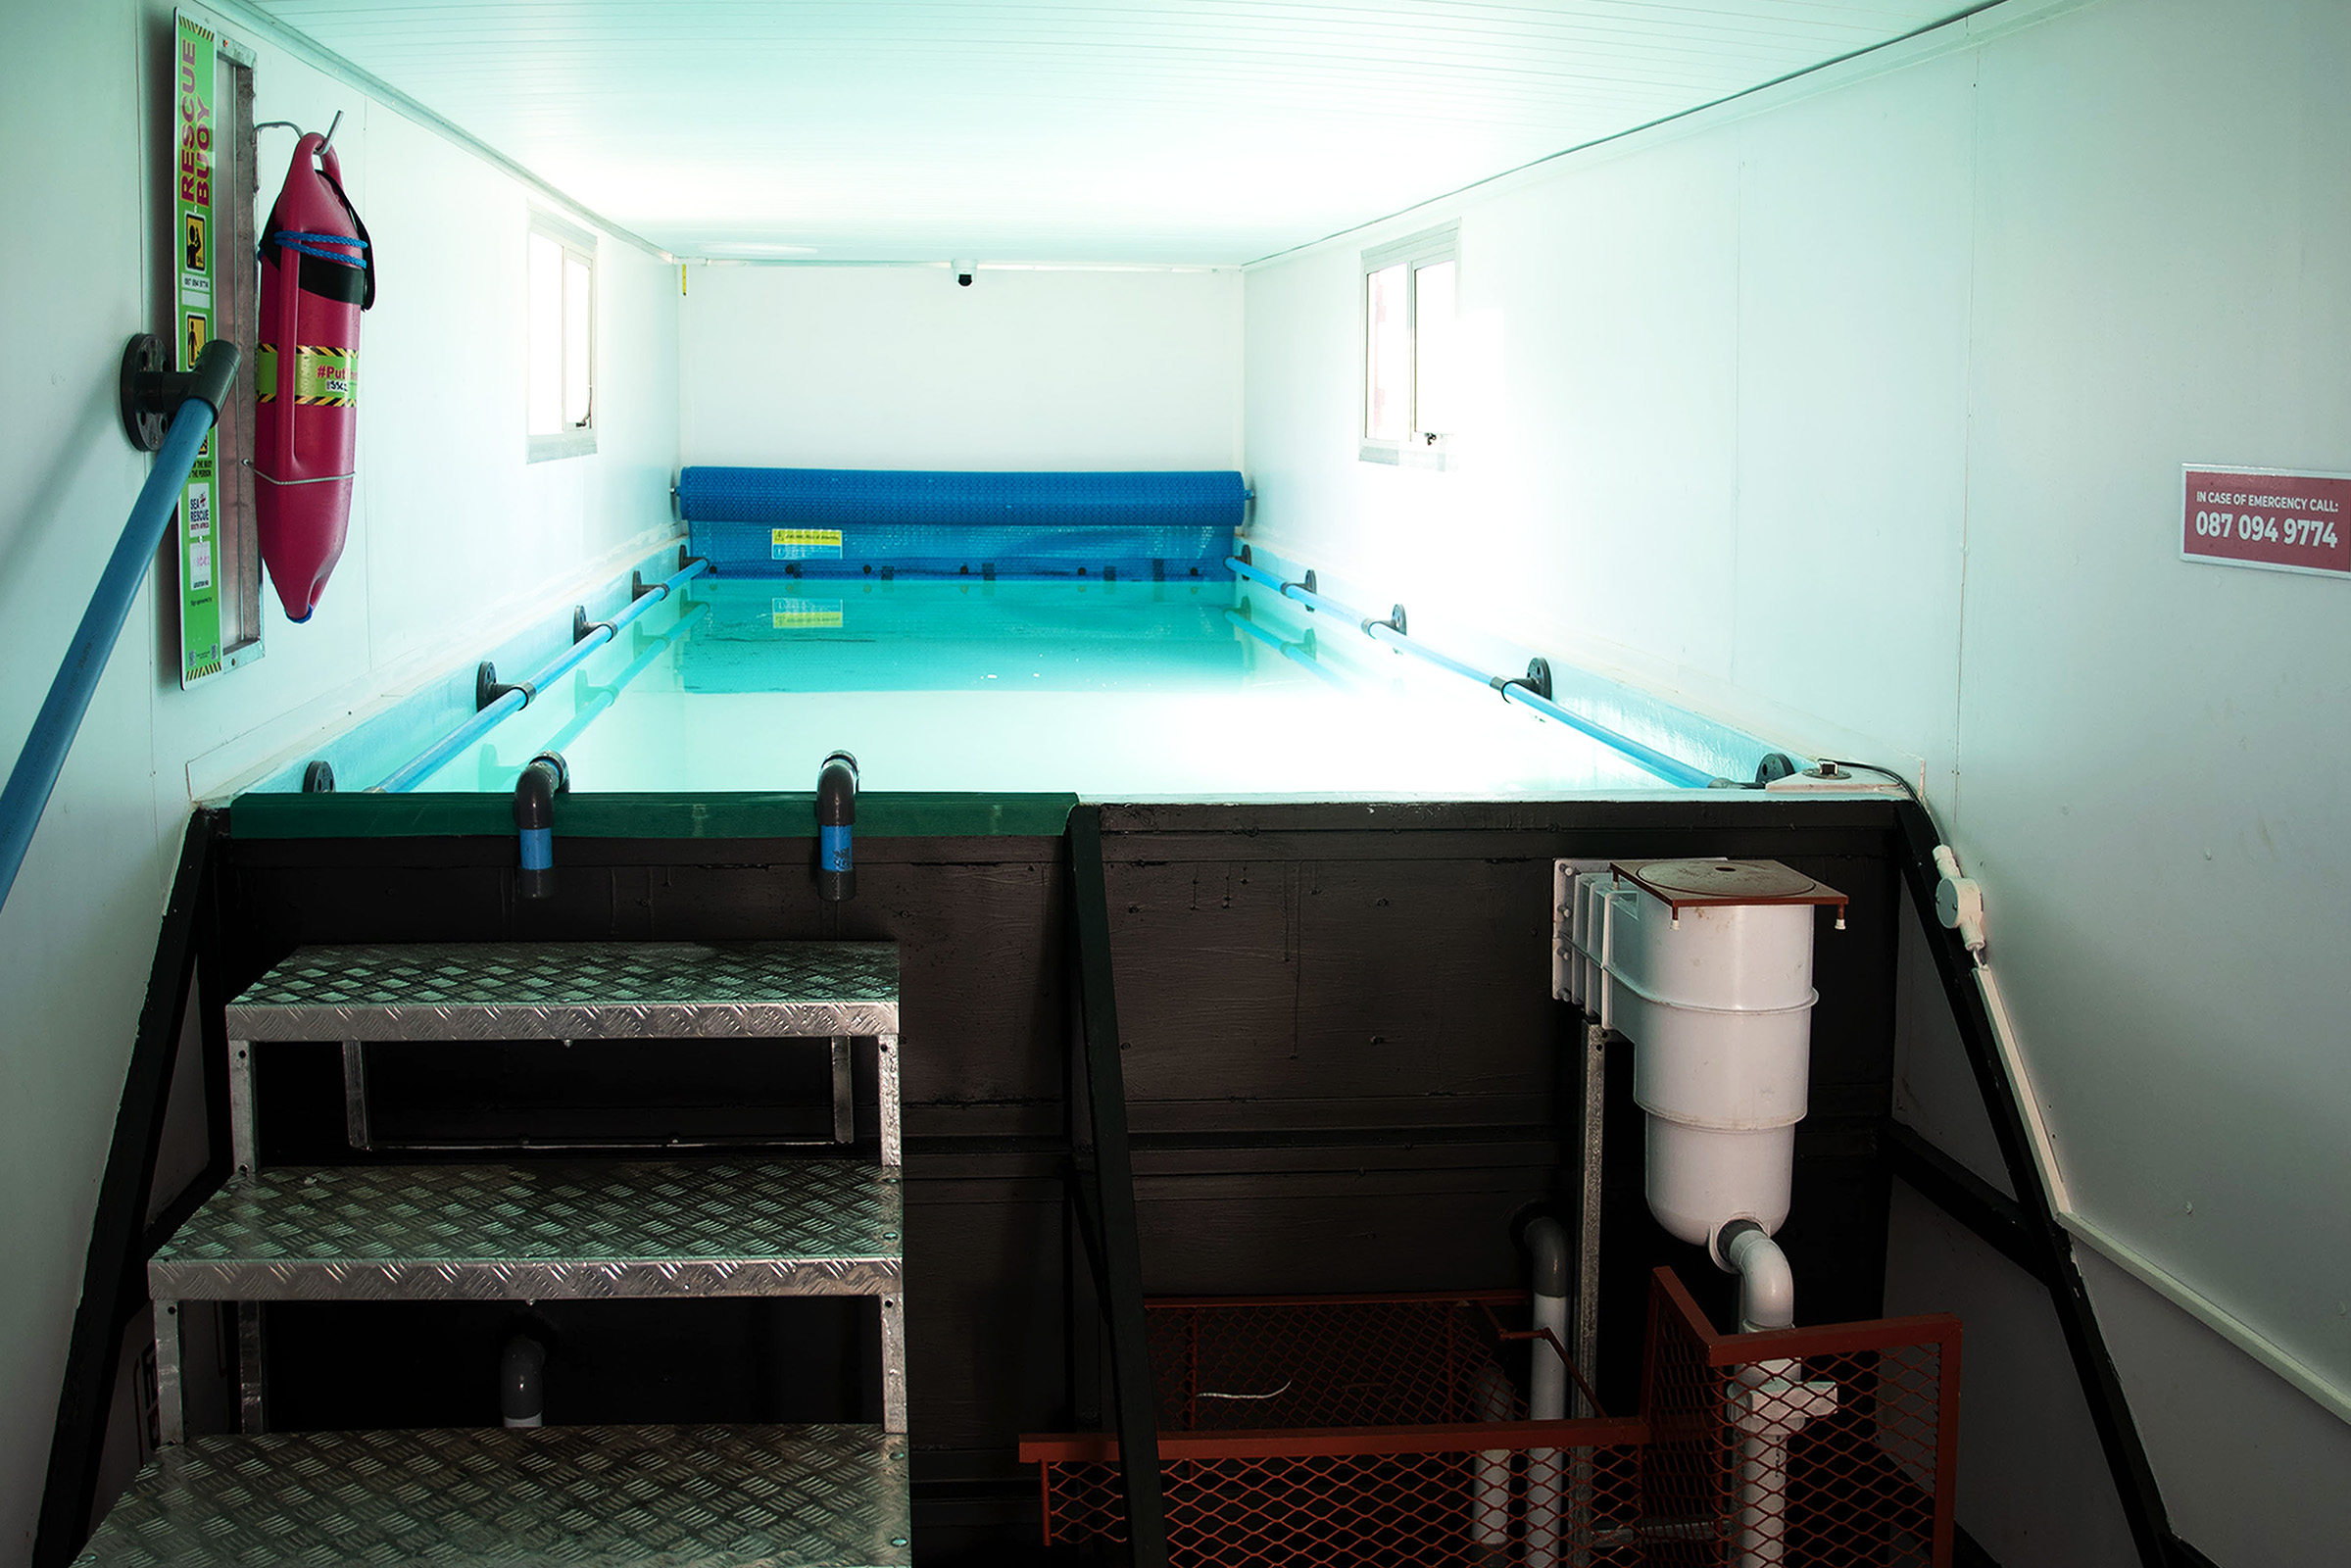 The pool at the Swimming Survival Centre. Image: Supplied